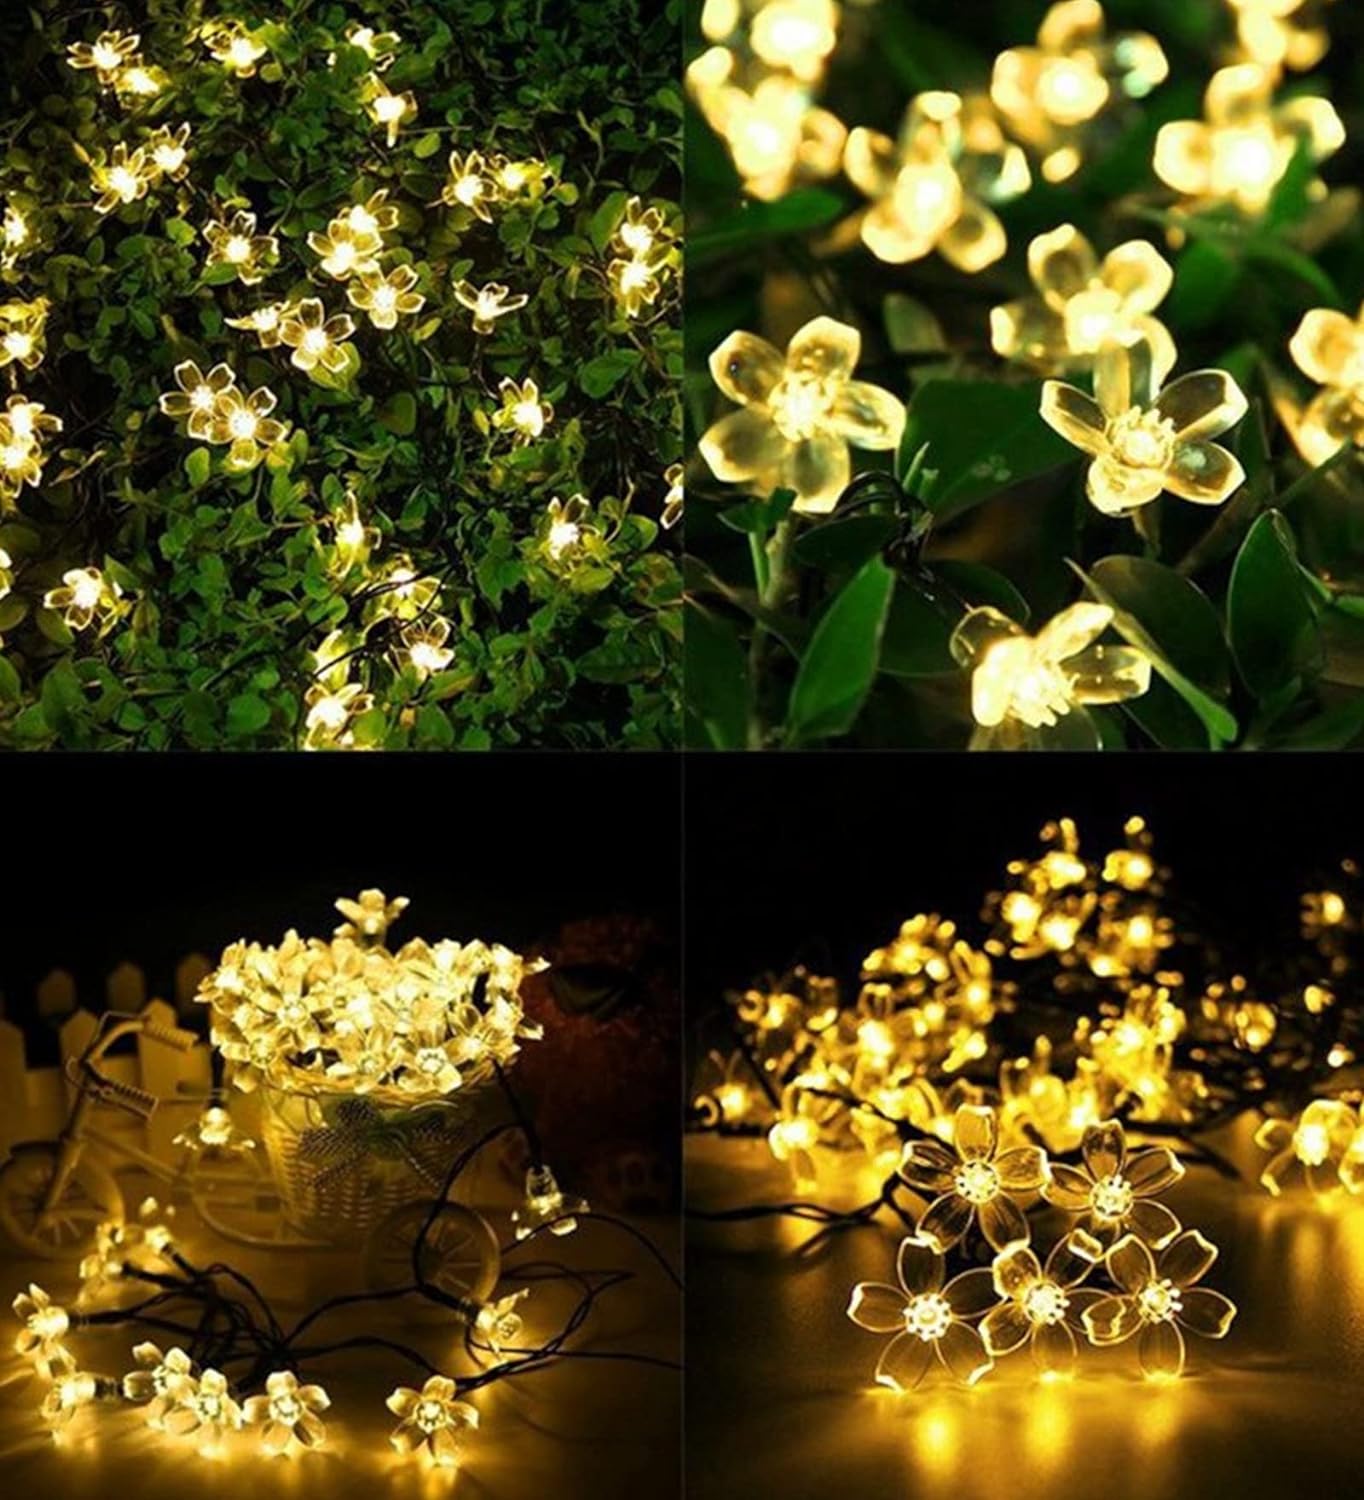 A collection of vibrant lights illuminating colorful flowers in a garden.